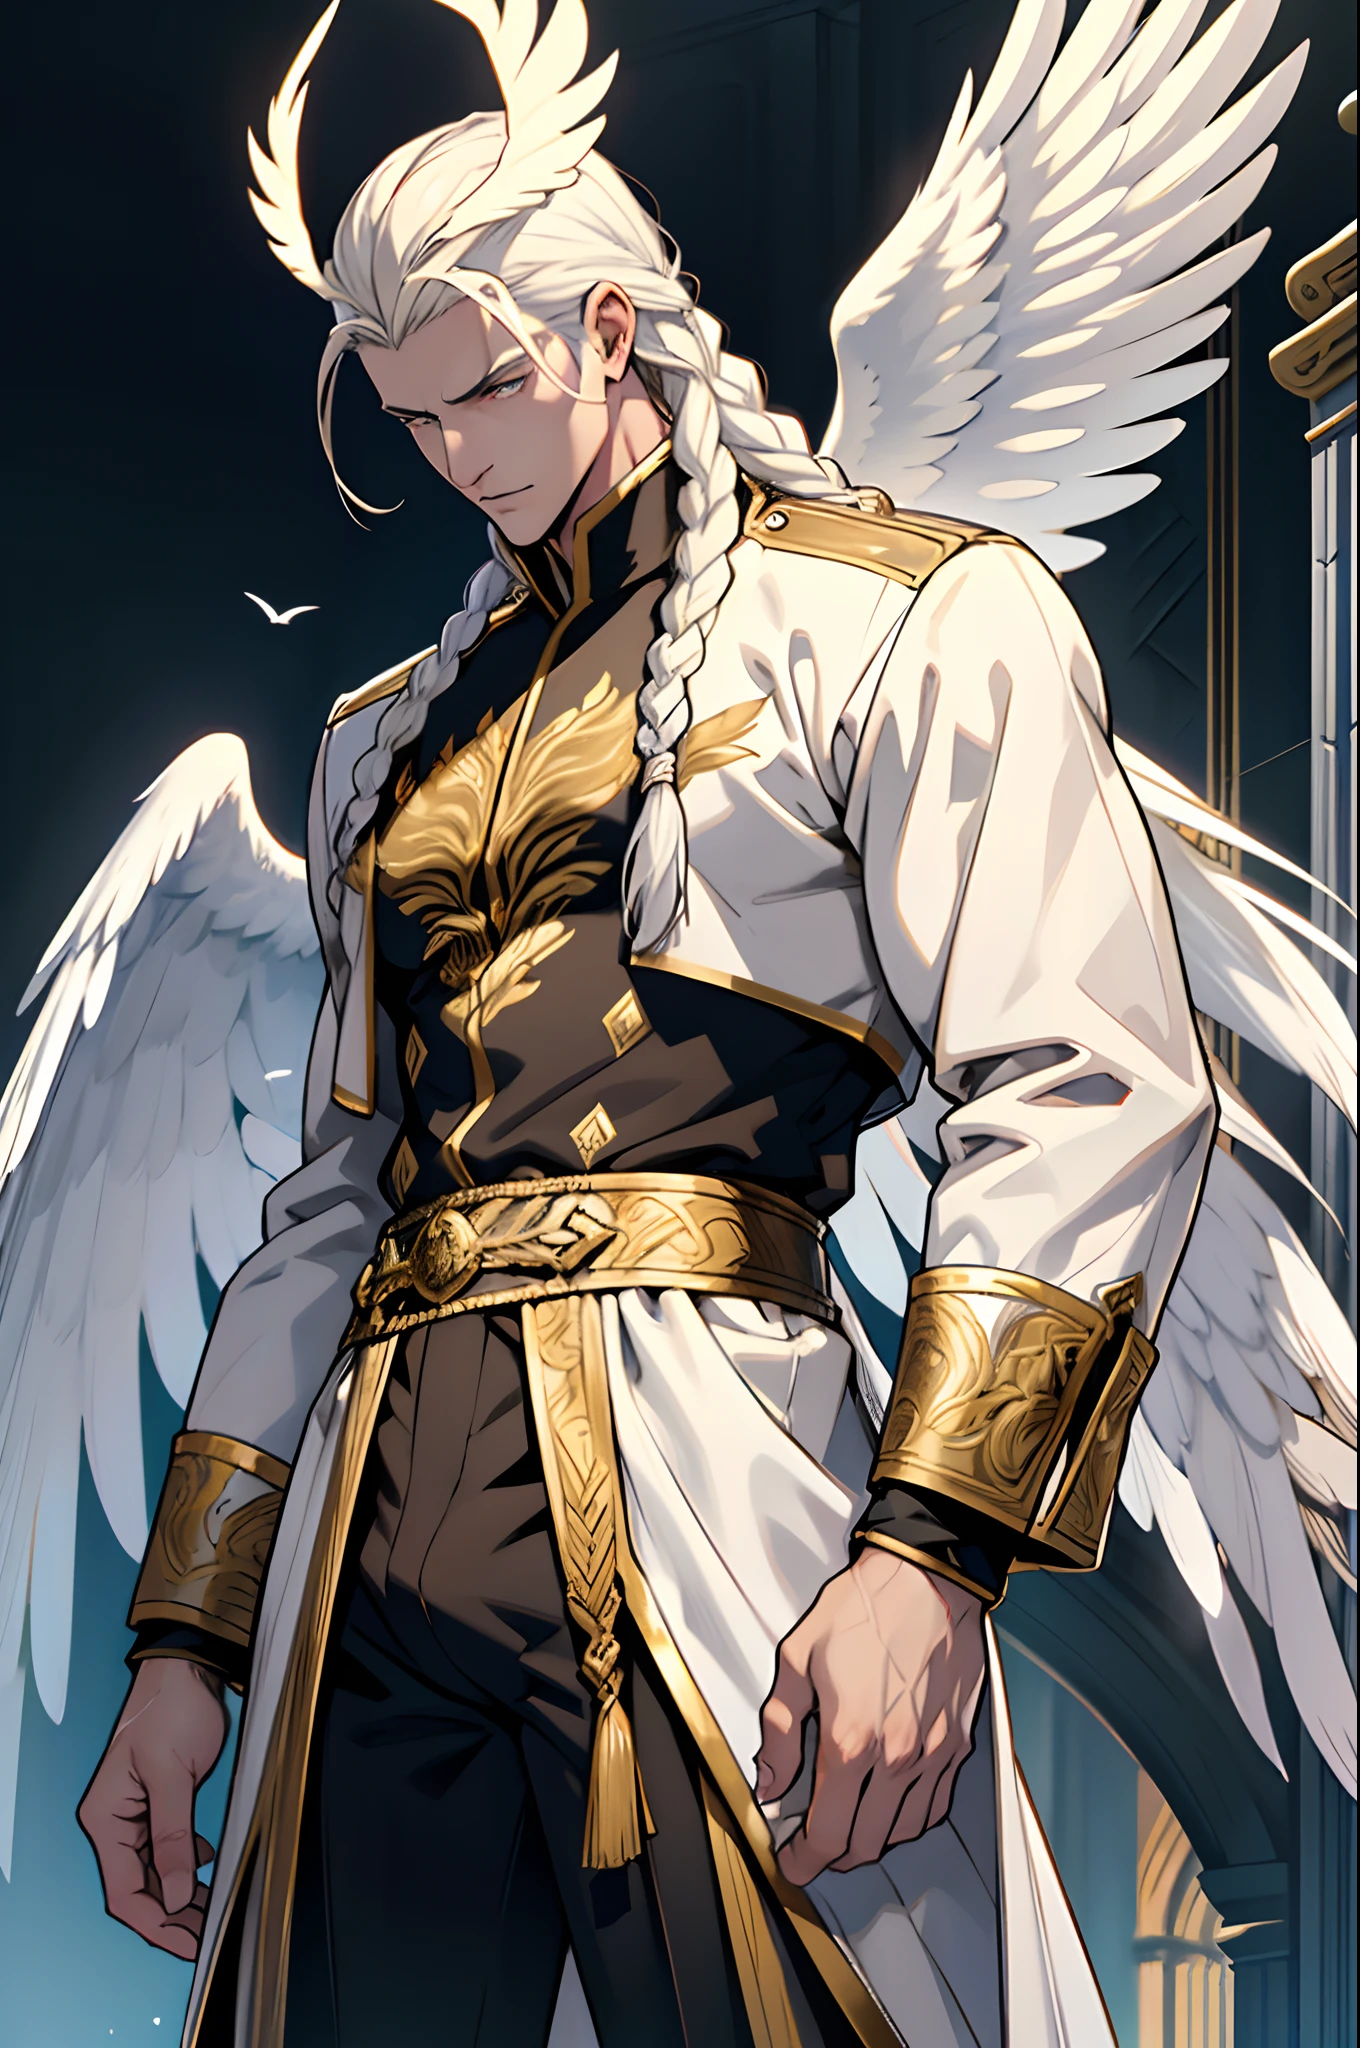 Caius is a handsome male, stands at 7ft tall. He has an athletic body structure. He wears royal attire thats silver and gold. He has beautiful long white silky hair and a golden eye color. He is seen with a staff. He has huge white wings. A big bulge in his pants. White Phoenix human form. His hair is braided back